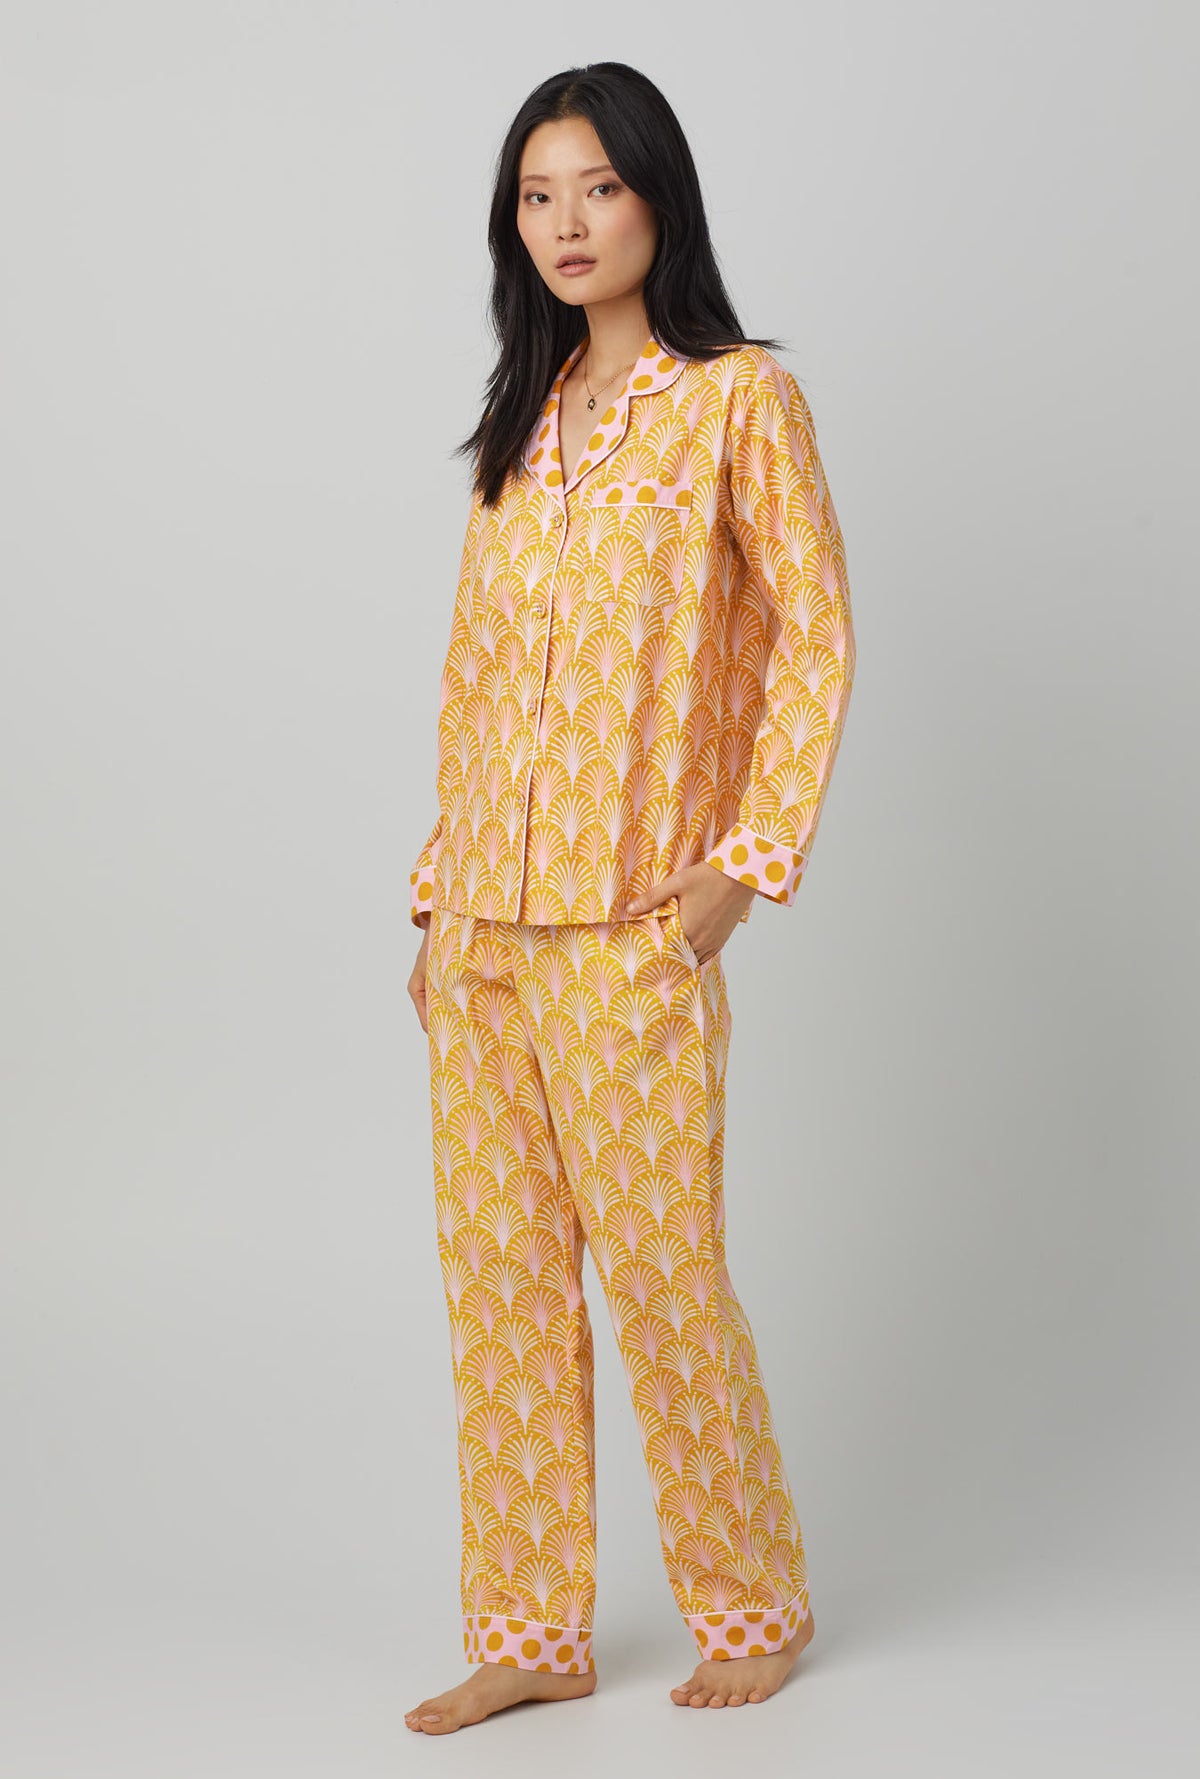 A lady wearing orange long sleeve classic woven cotton poplin pj set with suite life print